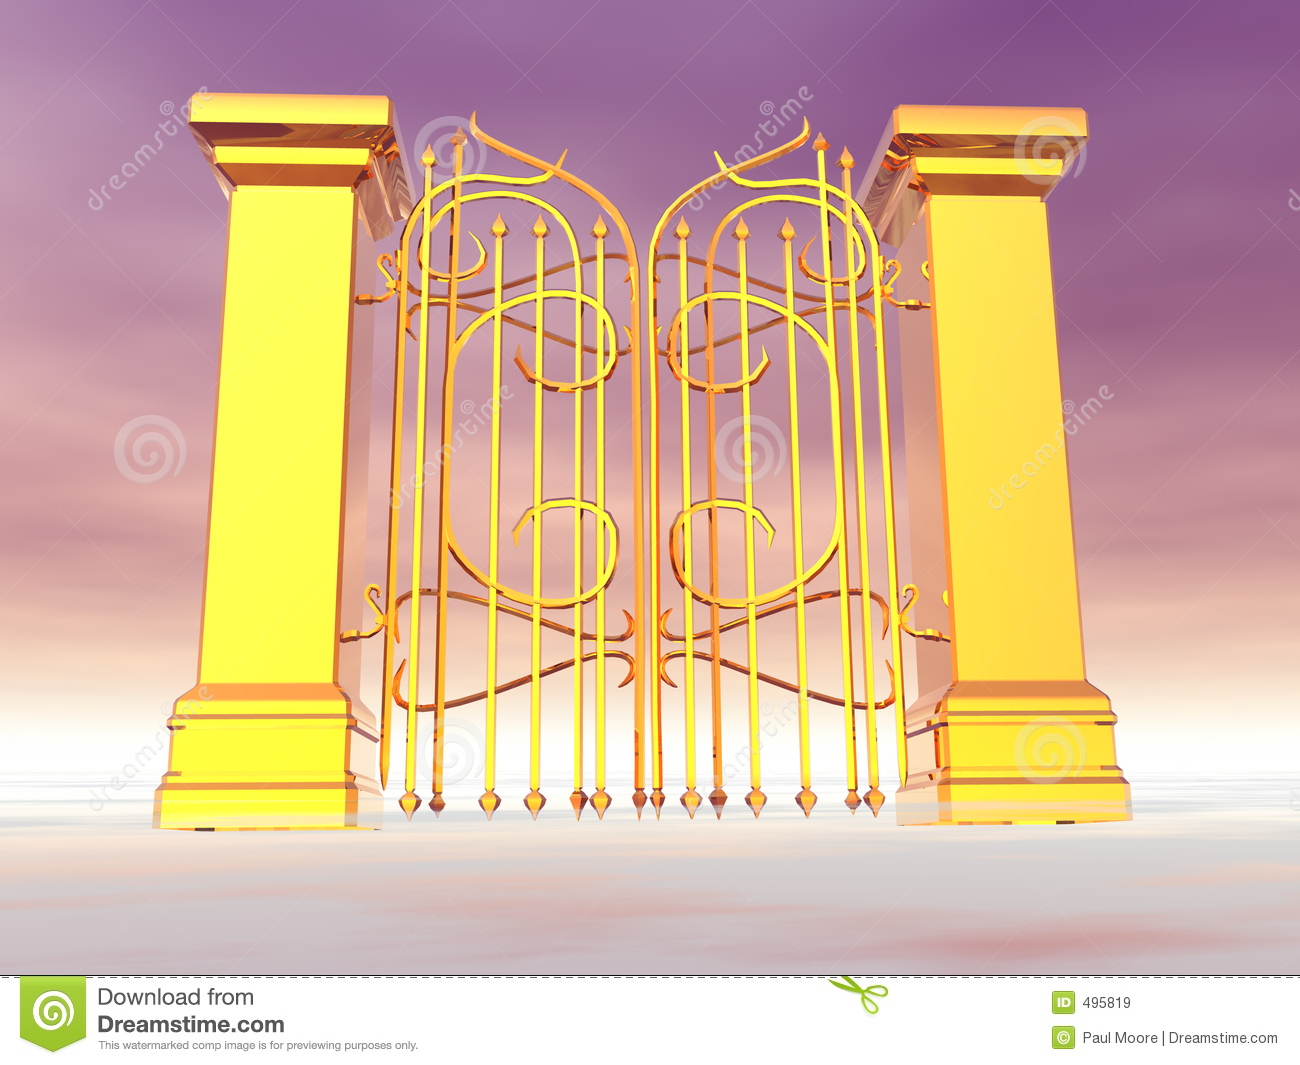 Heaven S Gate Royalty Free Stock Images   Image  495819